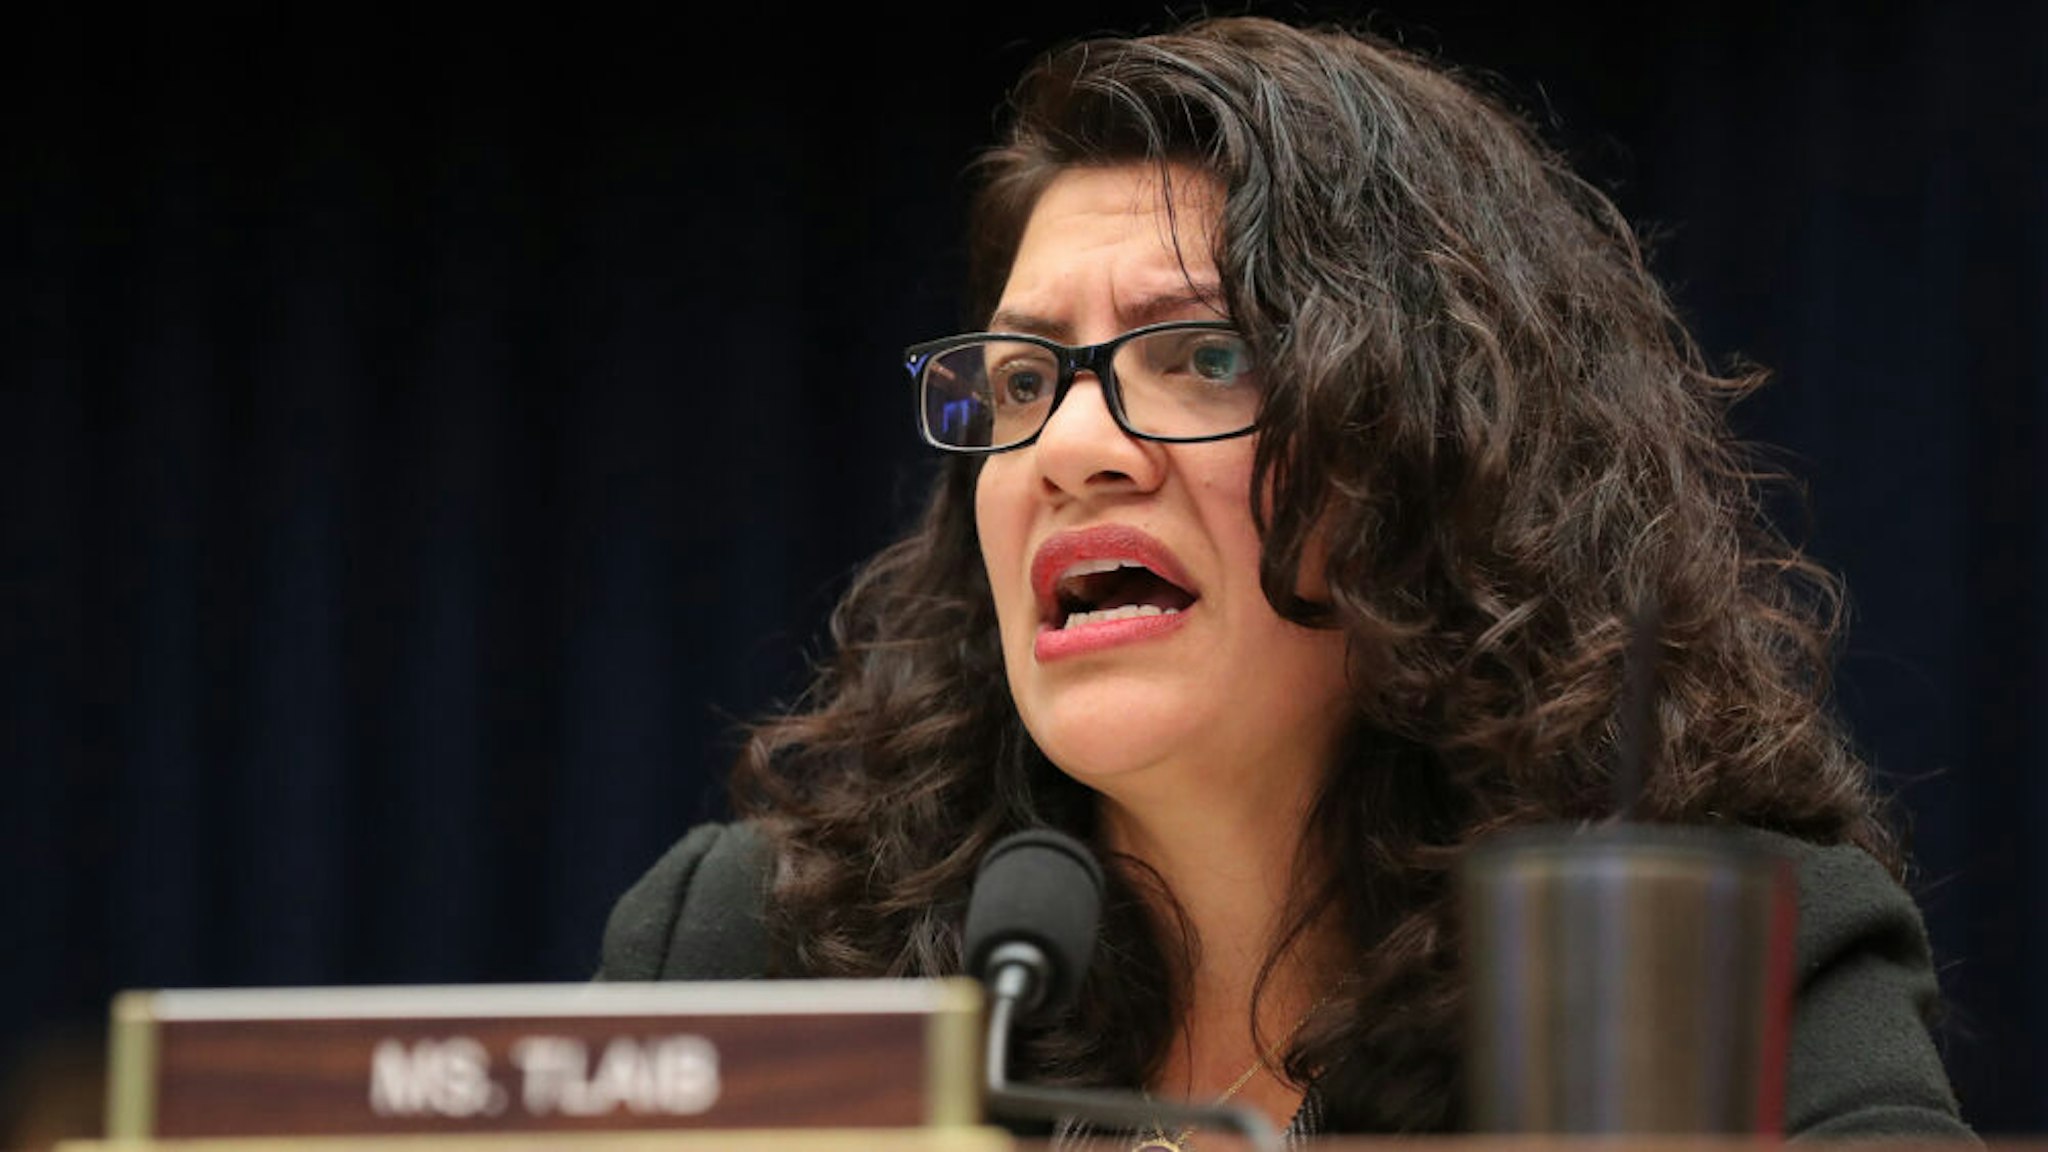 WASHINGTON, DC - OCTOBER 23: House Financial Services Committee member Rep. Rashida Tlaib (D-MI) questions Facebook co-founder and CEO Mark Zuckerberg during a hearing in the Rayburn House Office Building on Capitol Hill October 23, 2019 in Washington, DC. Zuckerberg testified about Facebook's proposed cryptocurrency Libra, how his company will handle false and misleading information by political leaders during the 2020 campaign and how it handles its users’ data and privacy.